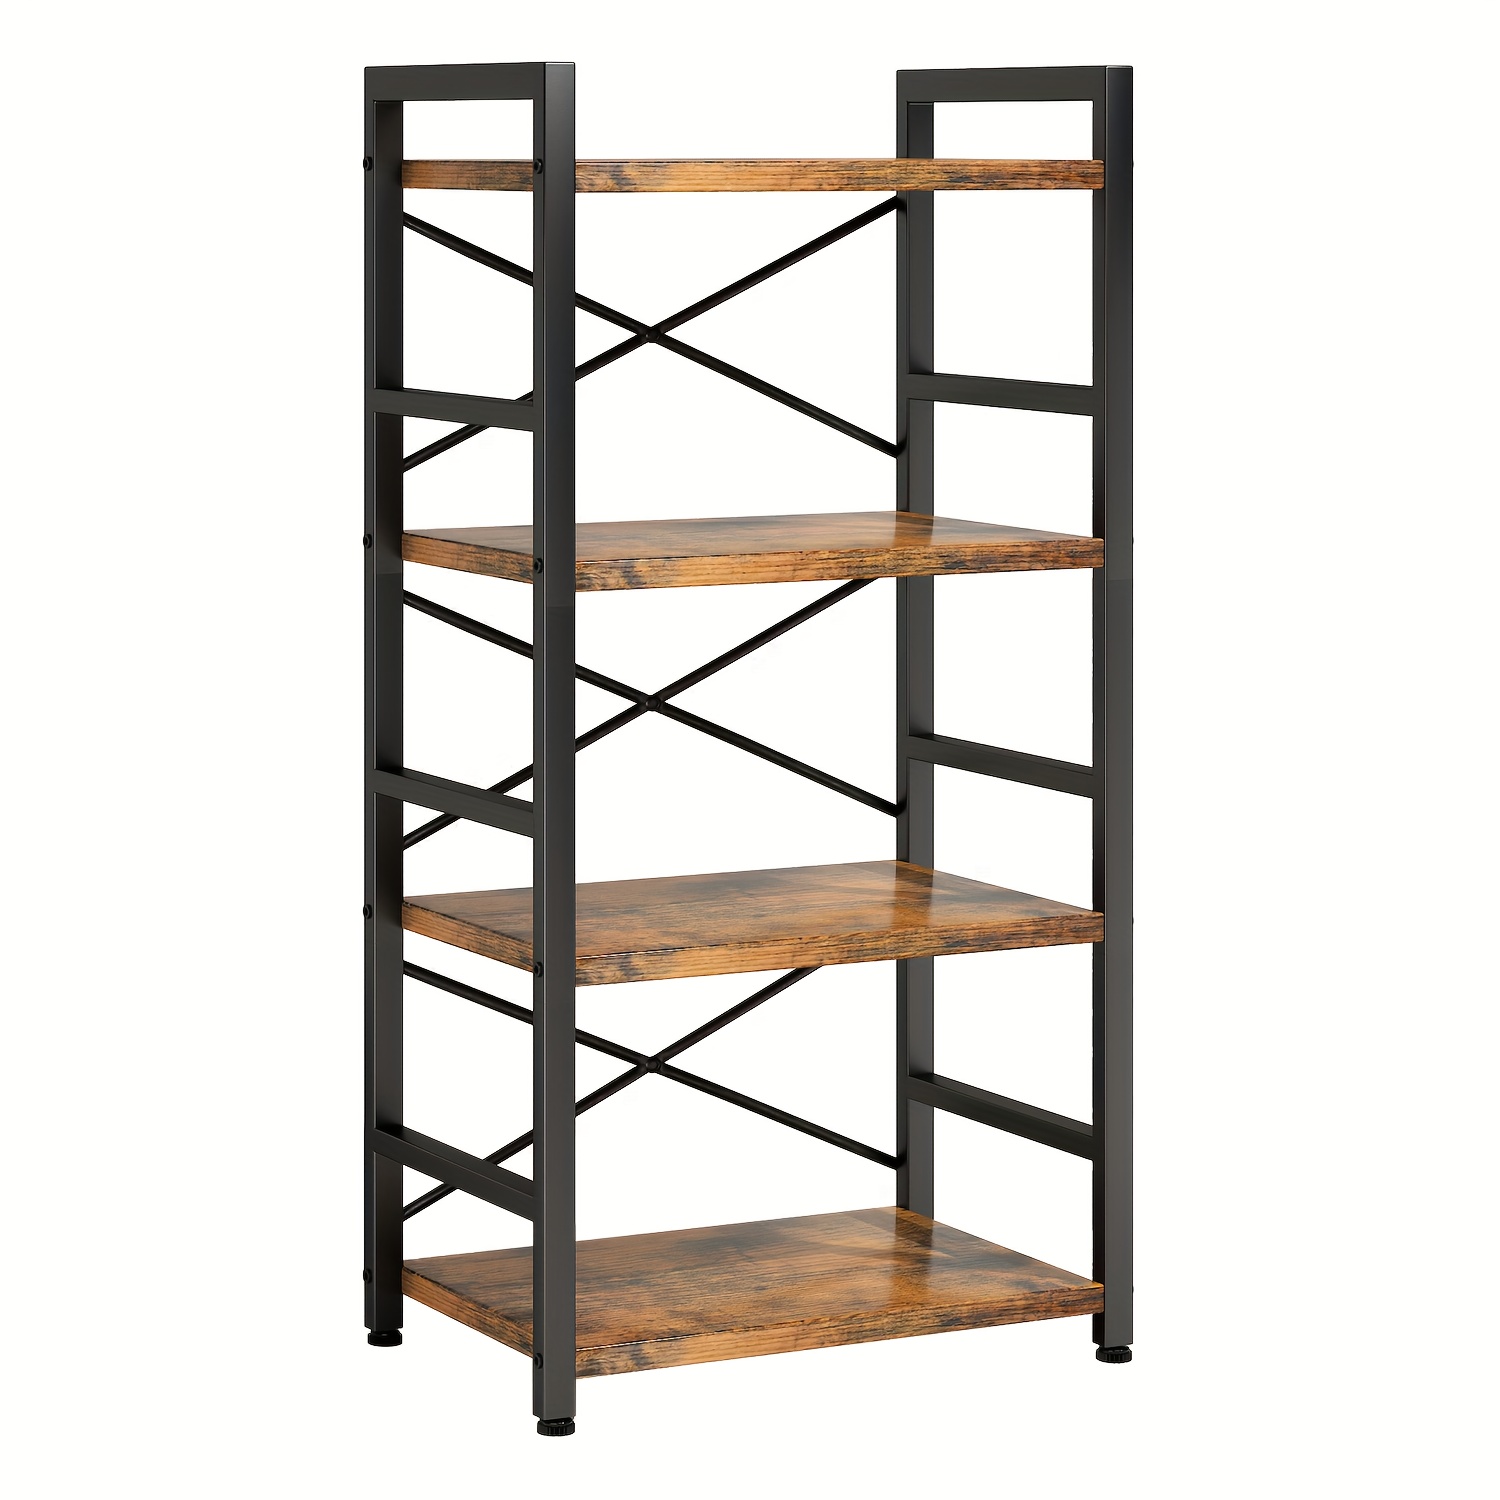 

Homeiju Bookshelf, 4 Tier Small Bookcase, Organizers And Storage, Metal Small Bookcase, Rustic Book Shelf Organization And Storage For Living Room, Bedroom, And Home Office (rustic Brown)